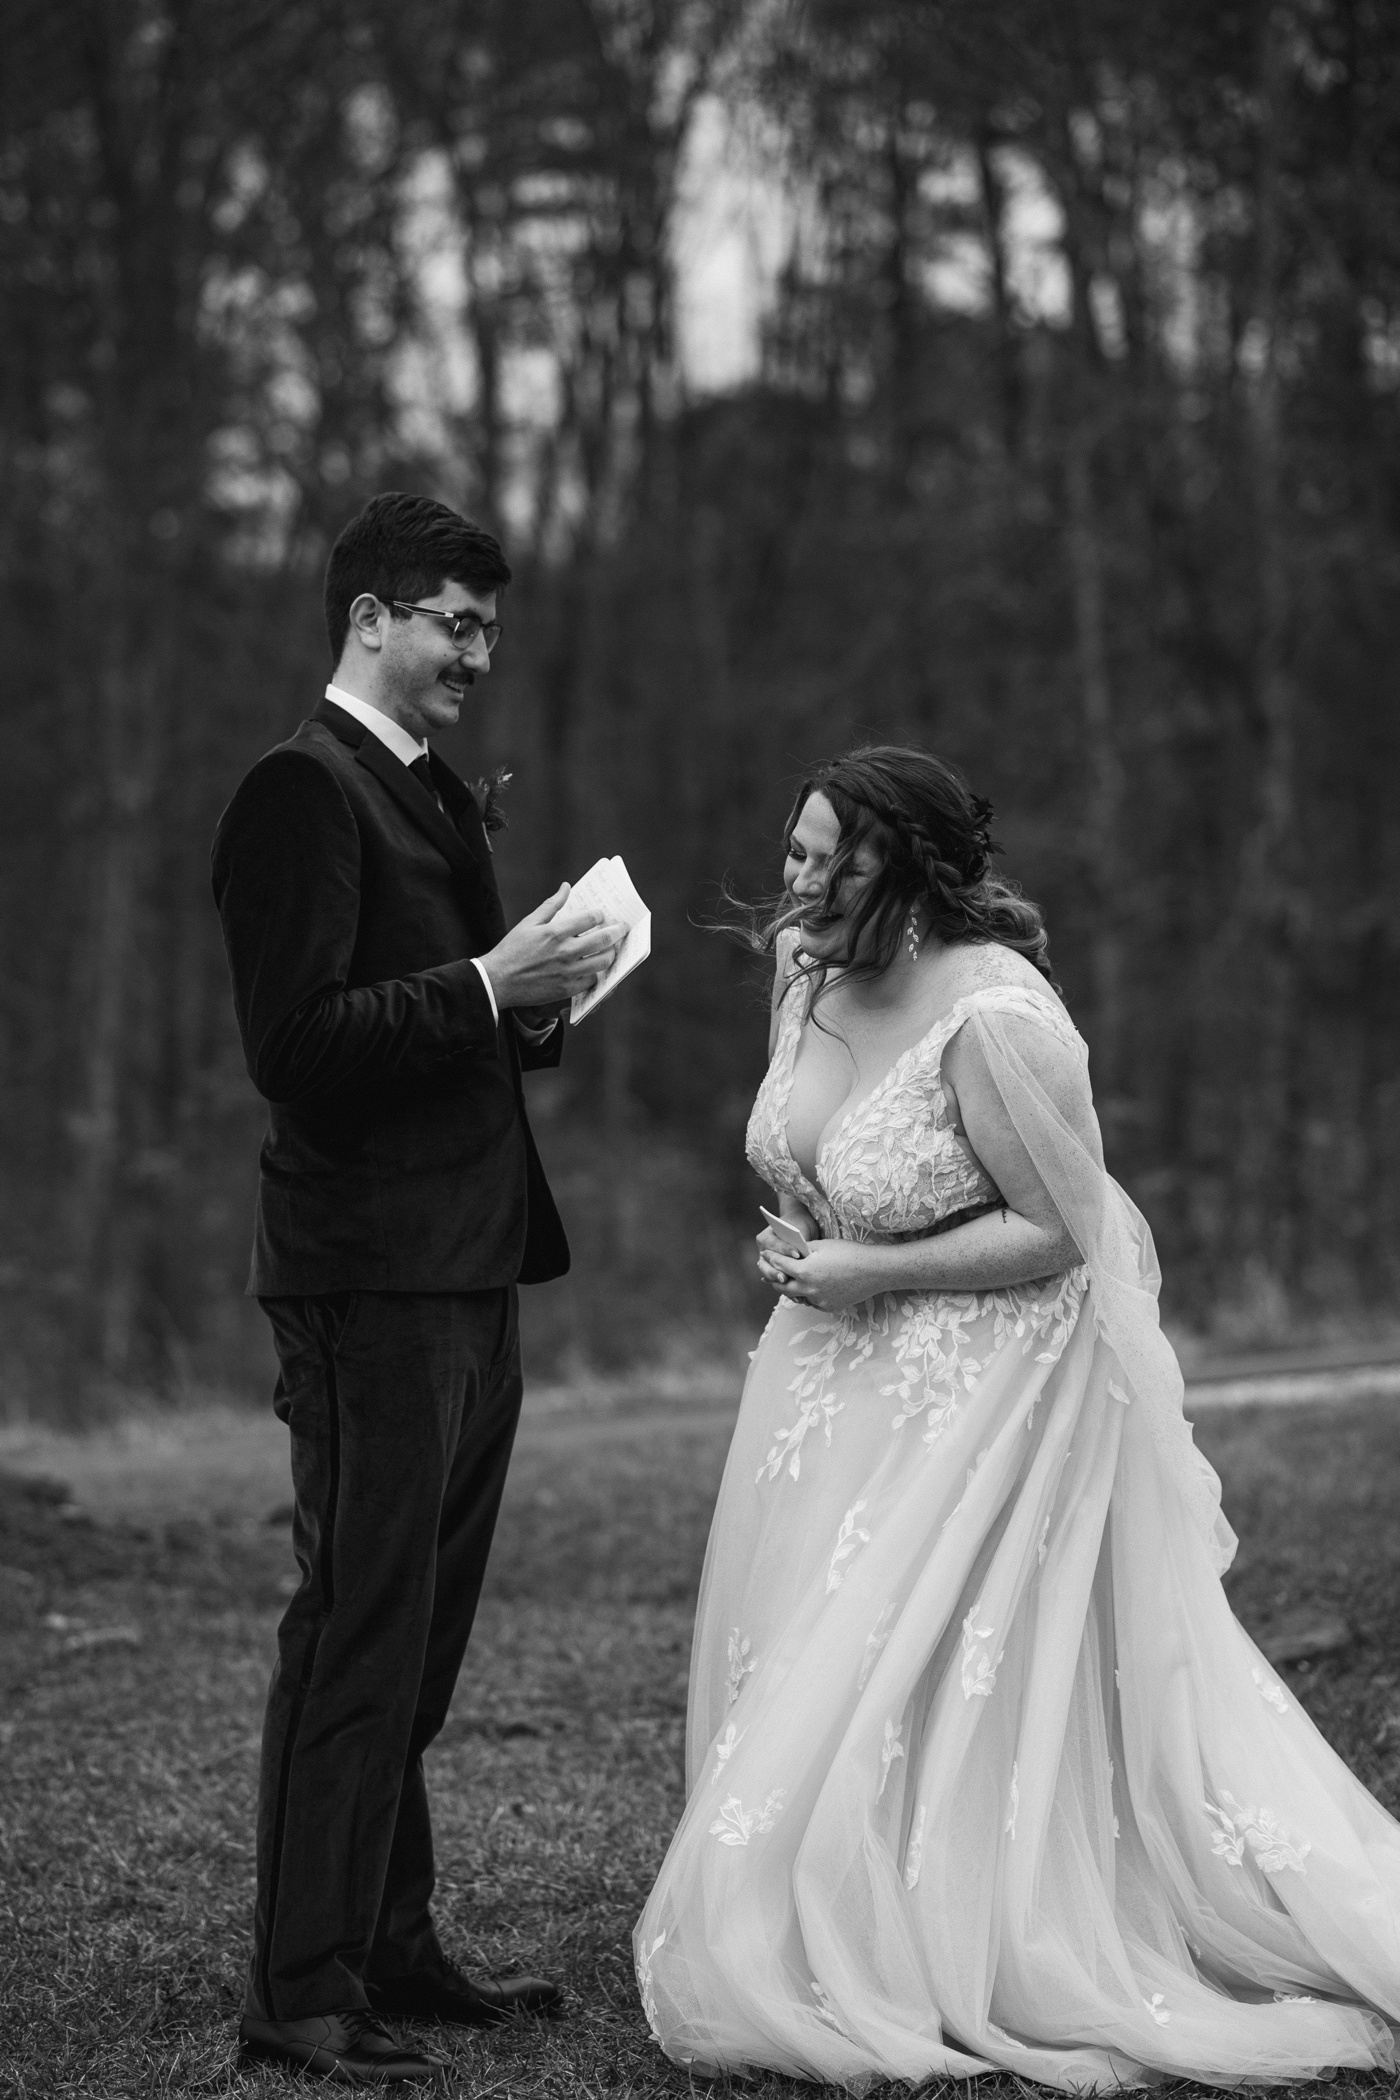 Bride and groom exchanging private vows after their first look